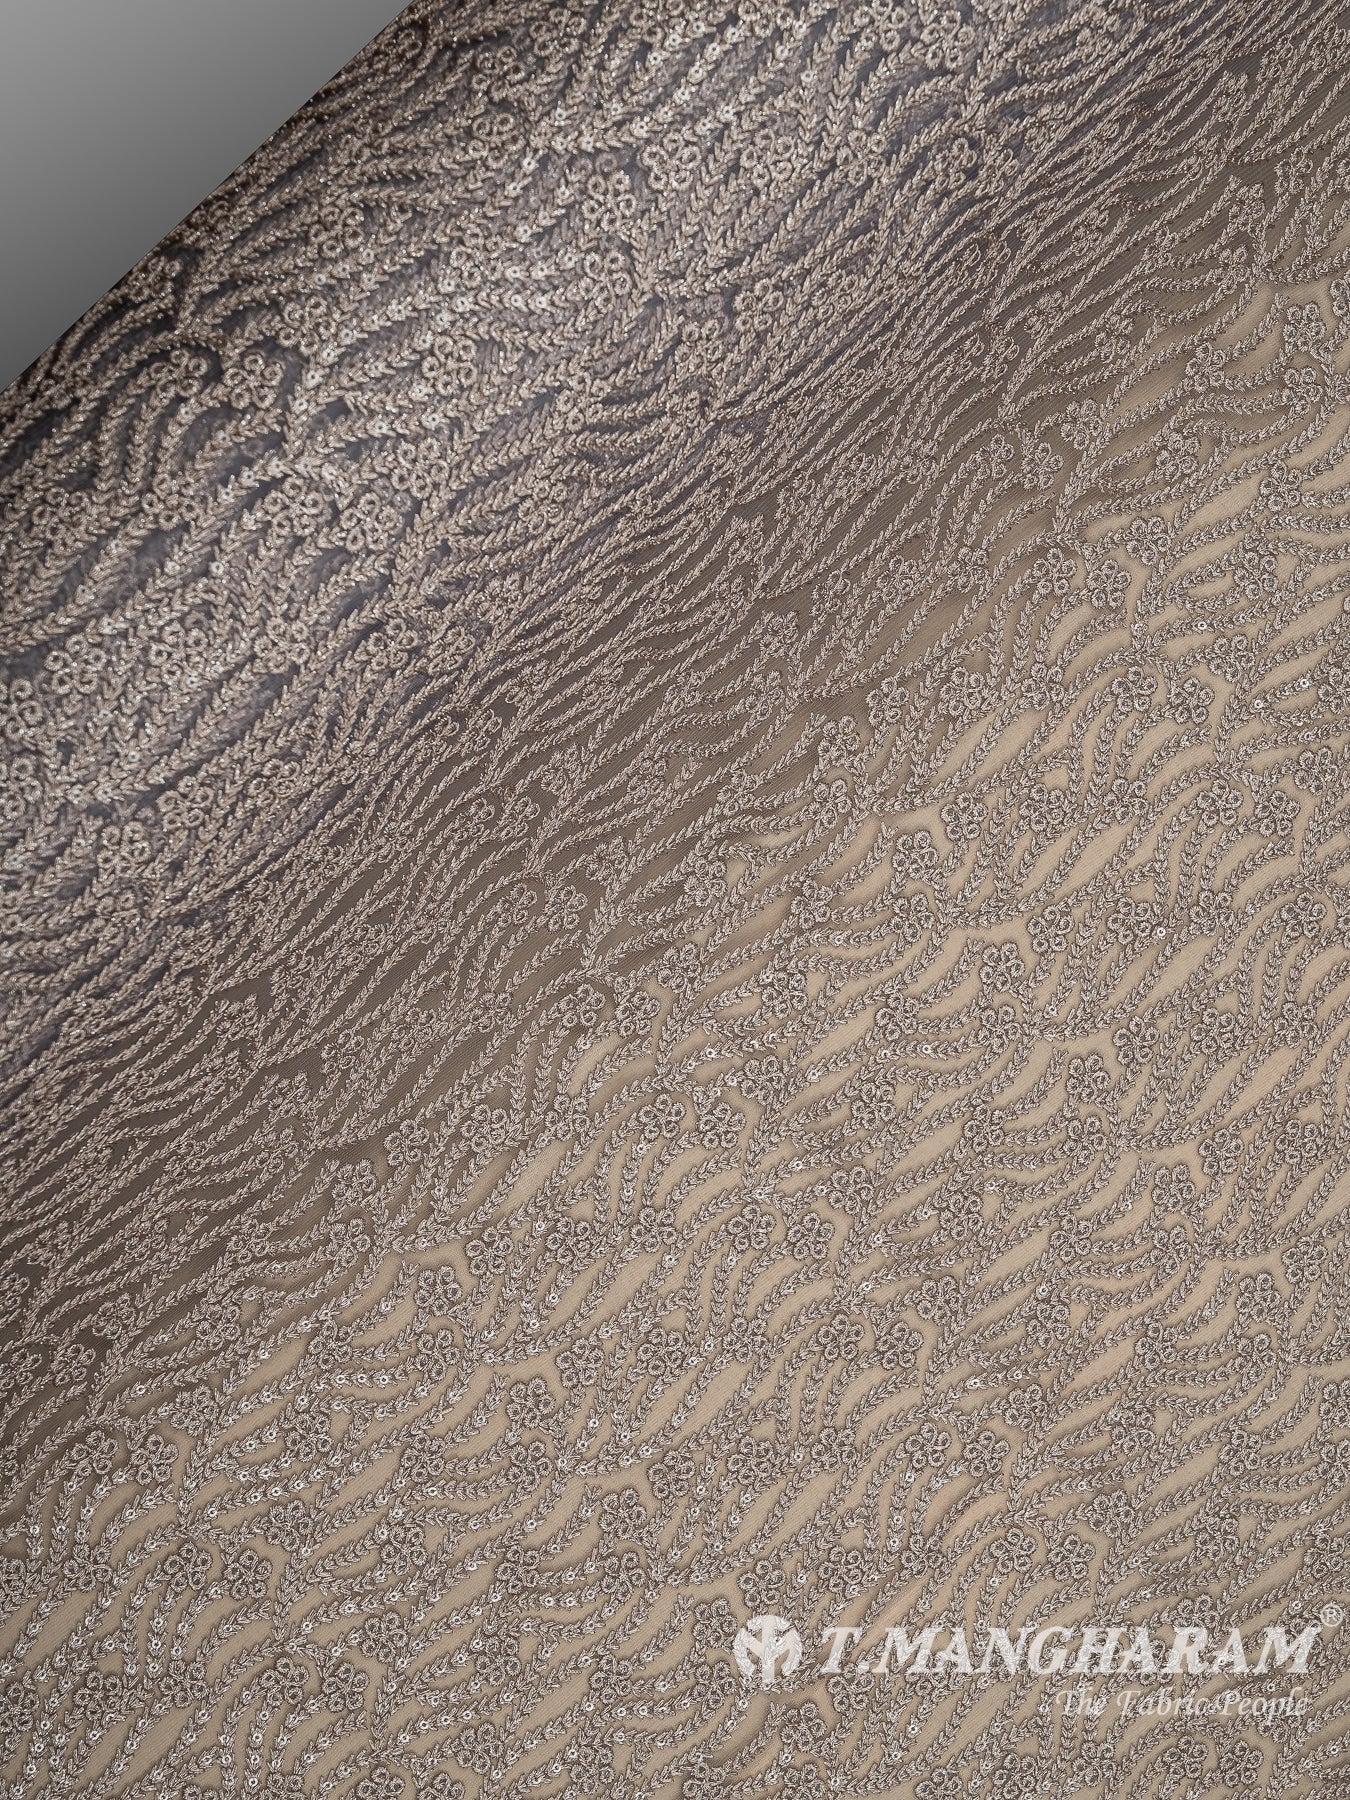 Beige Net Embroidery Fabric - EC8428 view-2